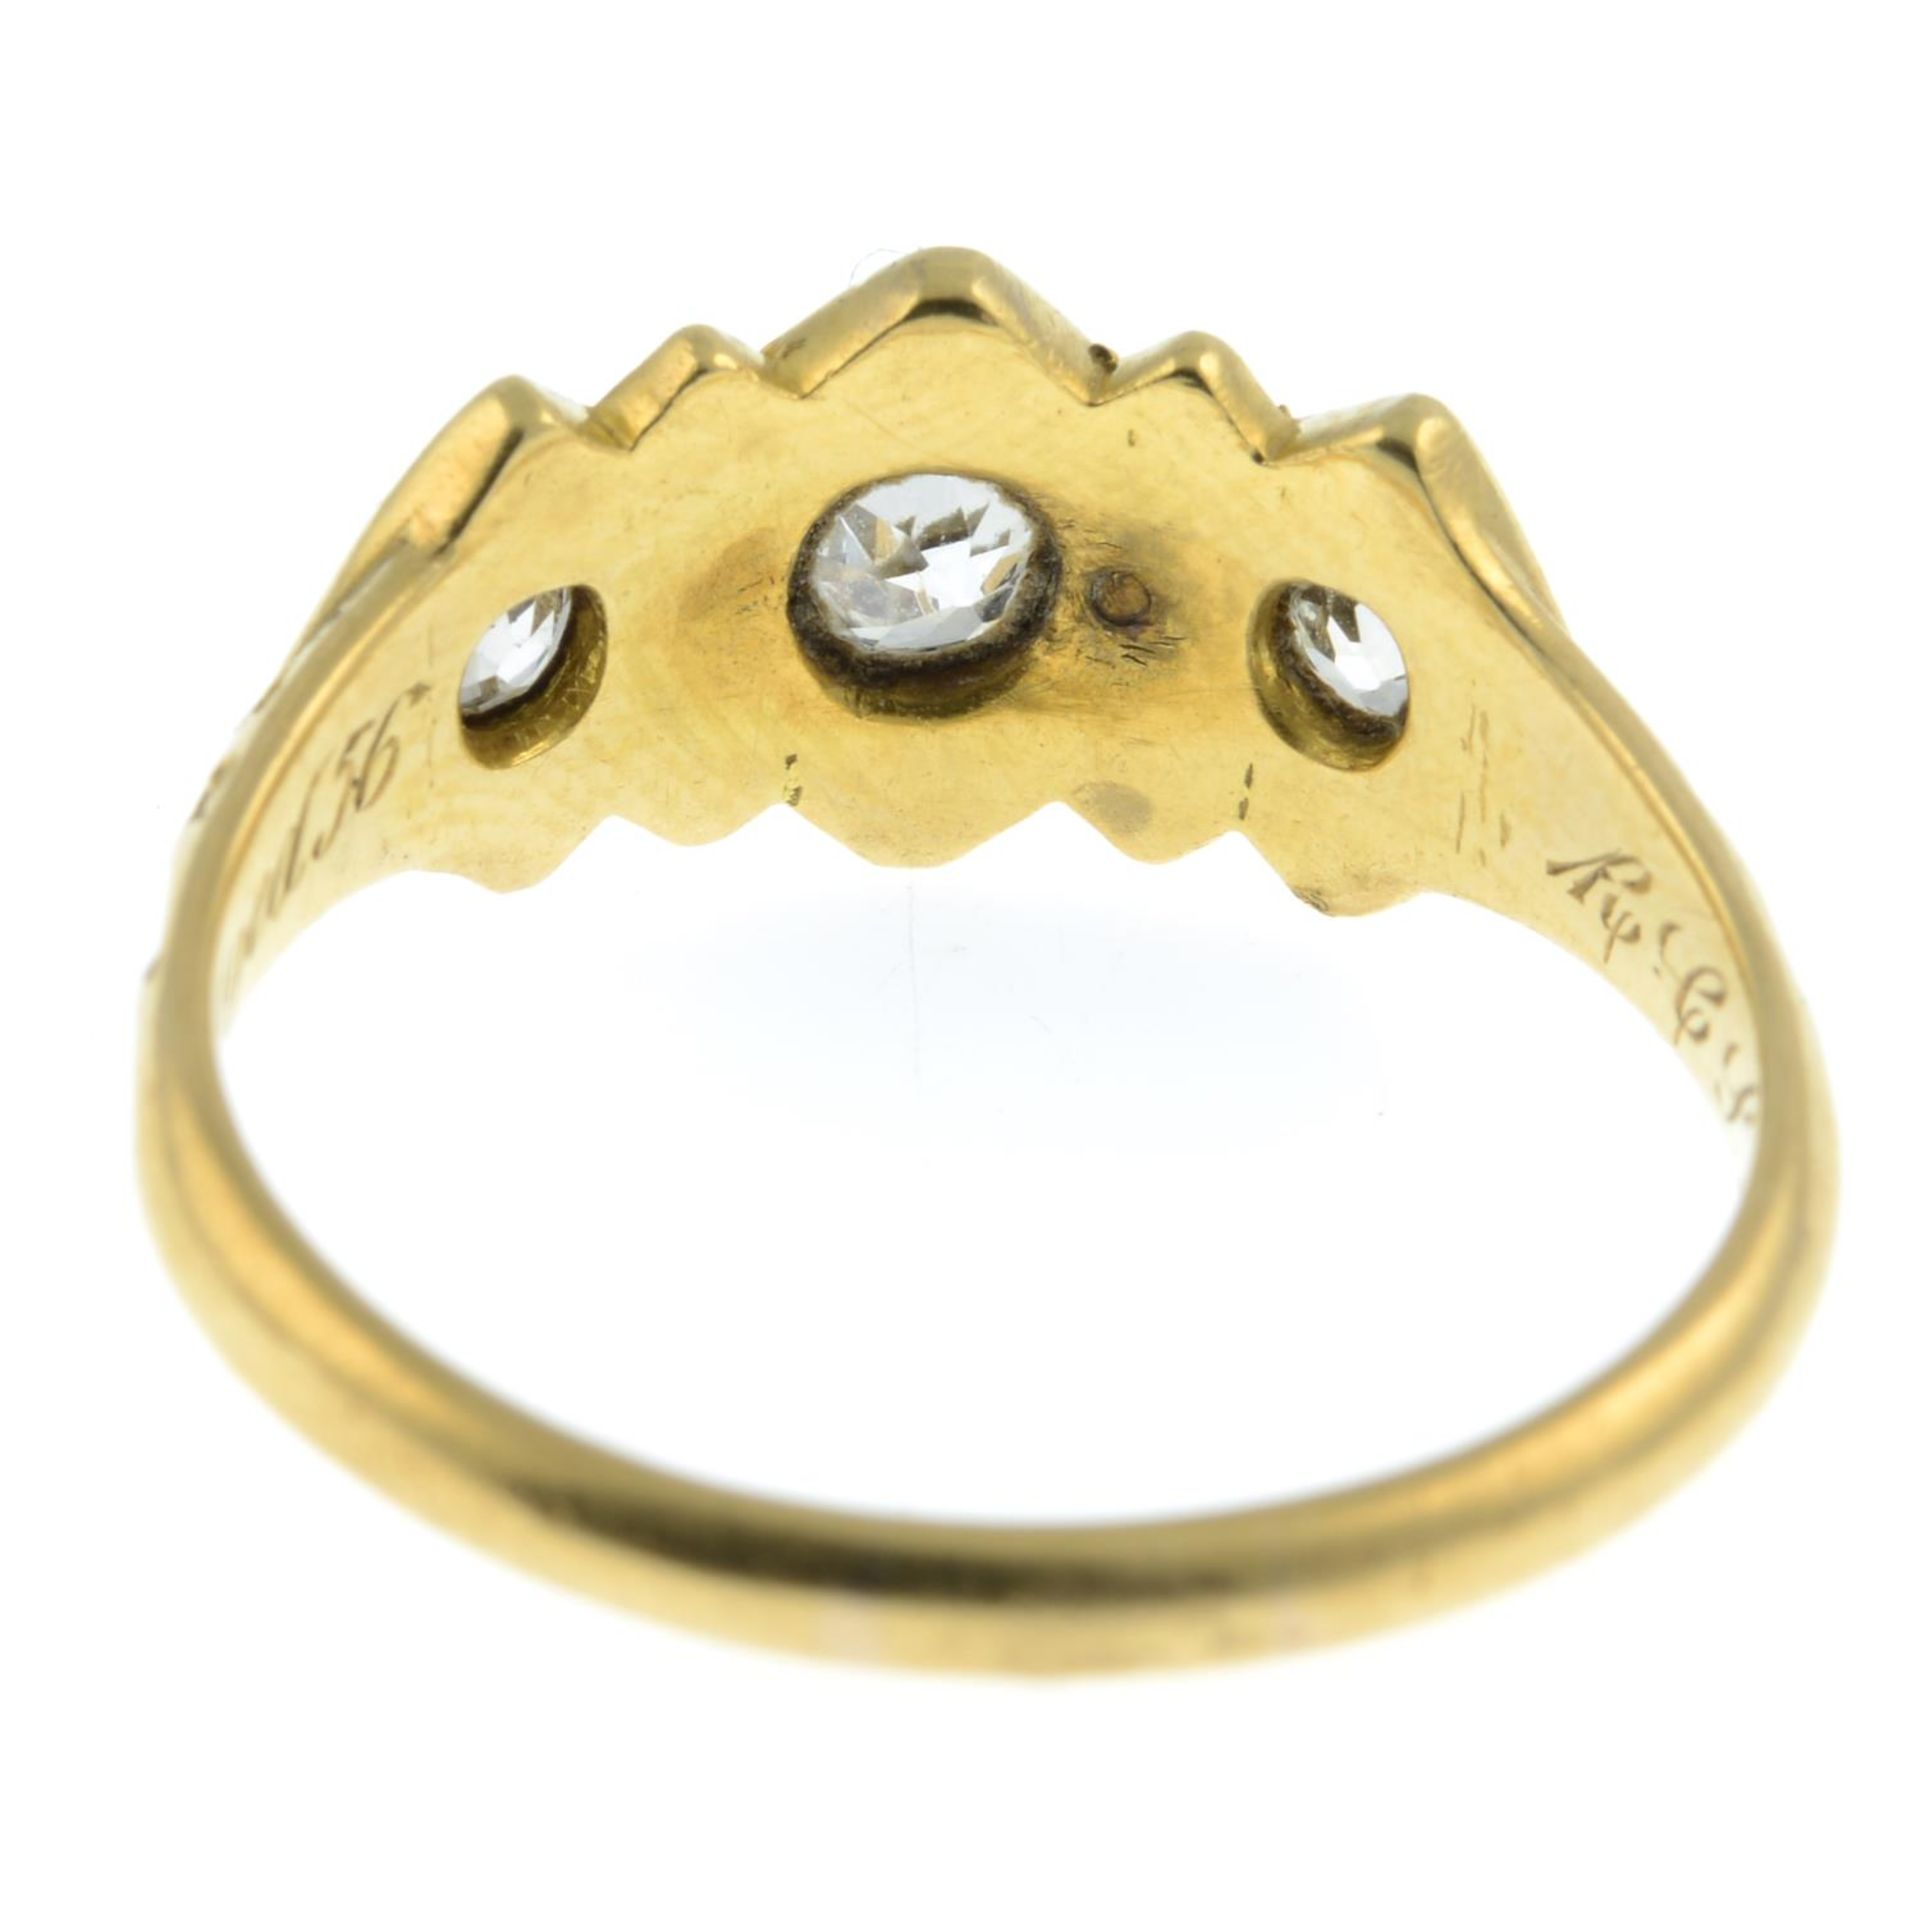 A mid 19th century 18ct gold old-cut diamond three-stone memorial ring, - Image 3 of 3